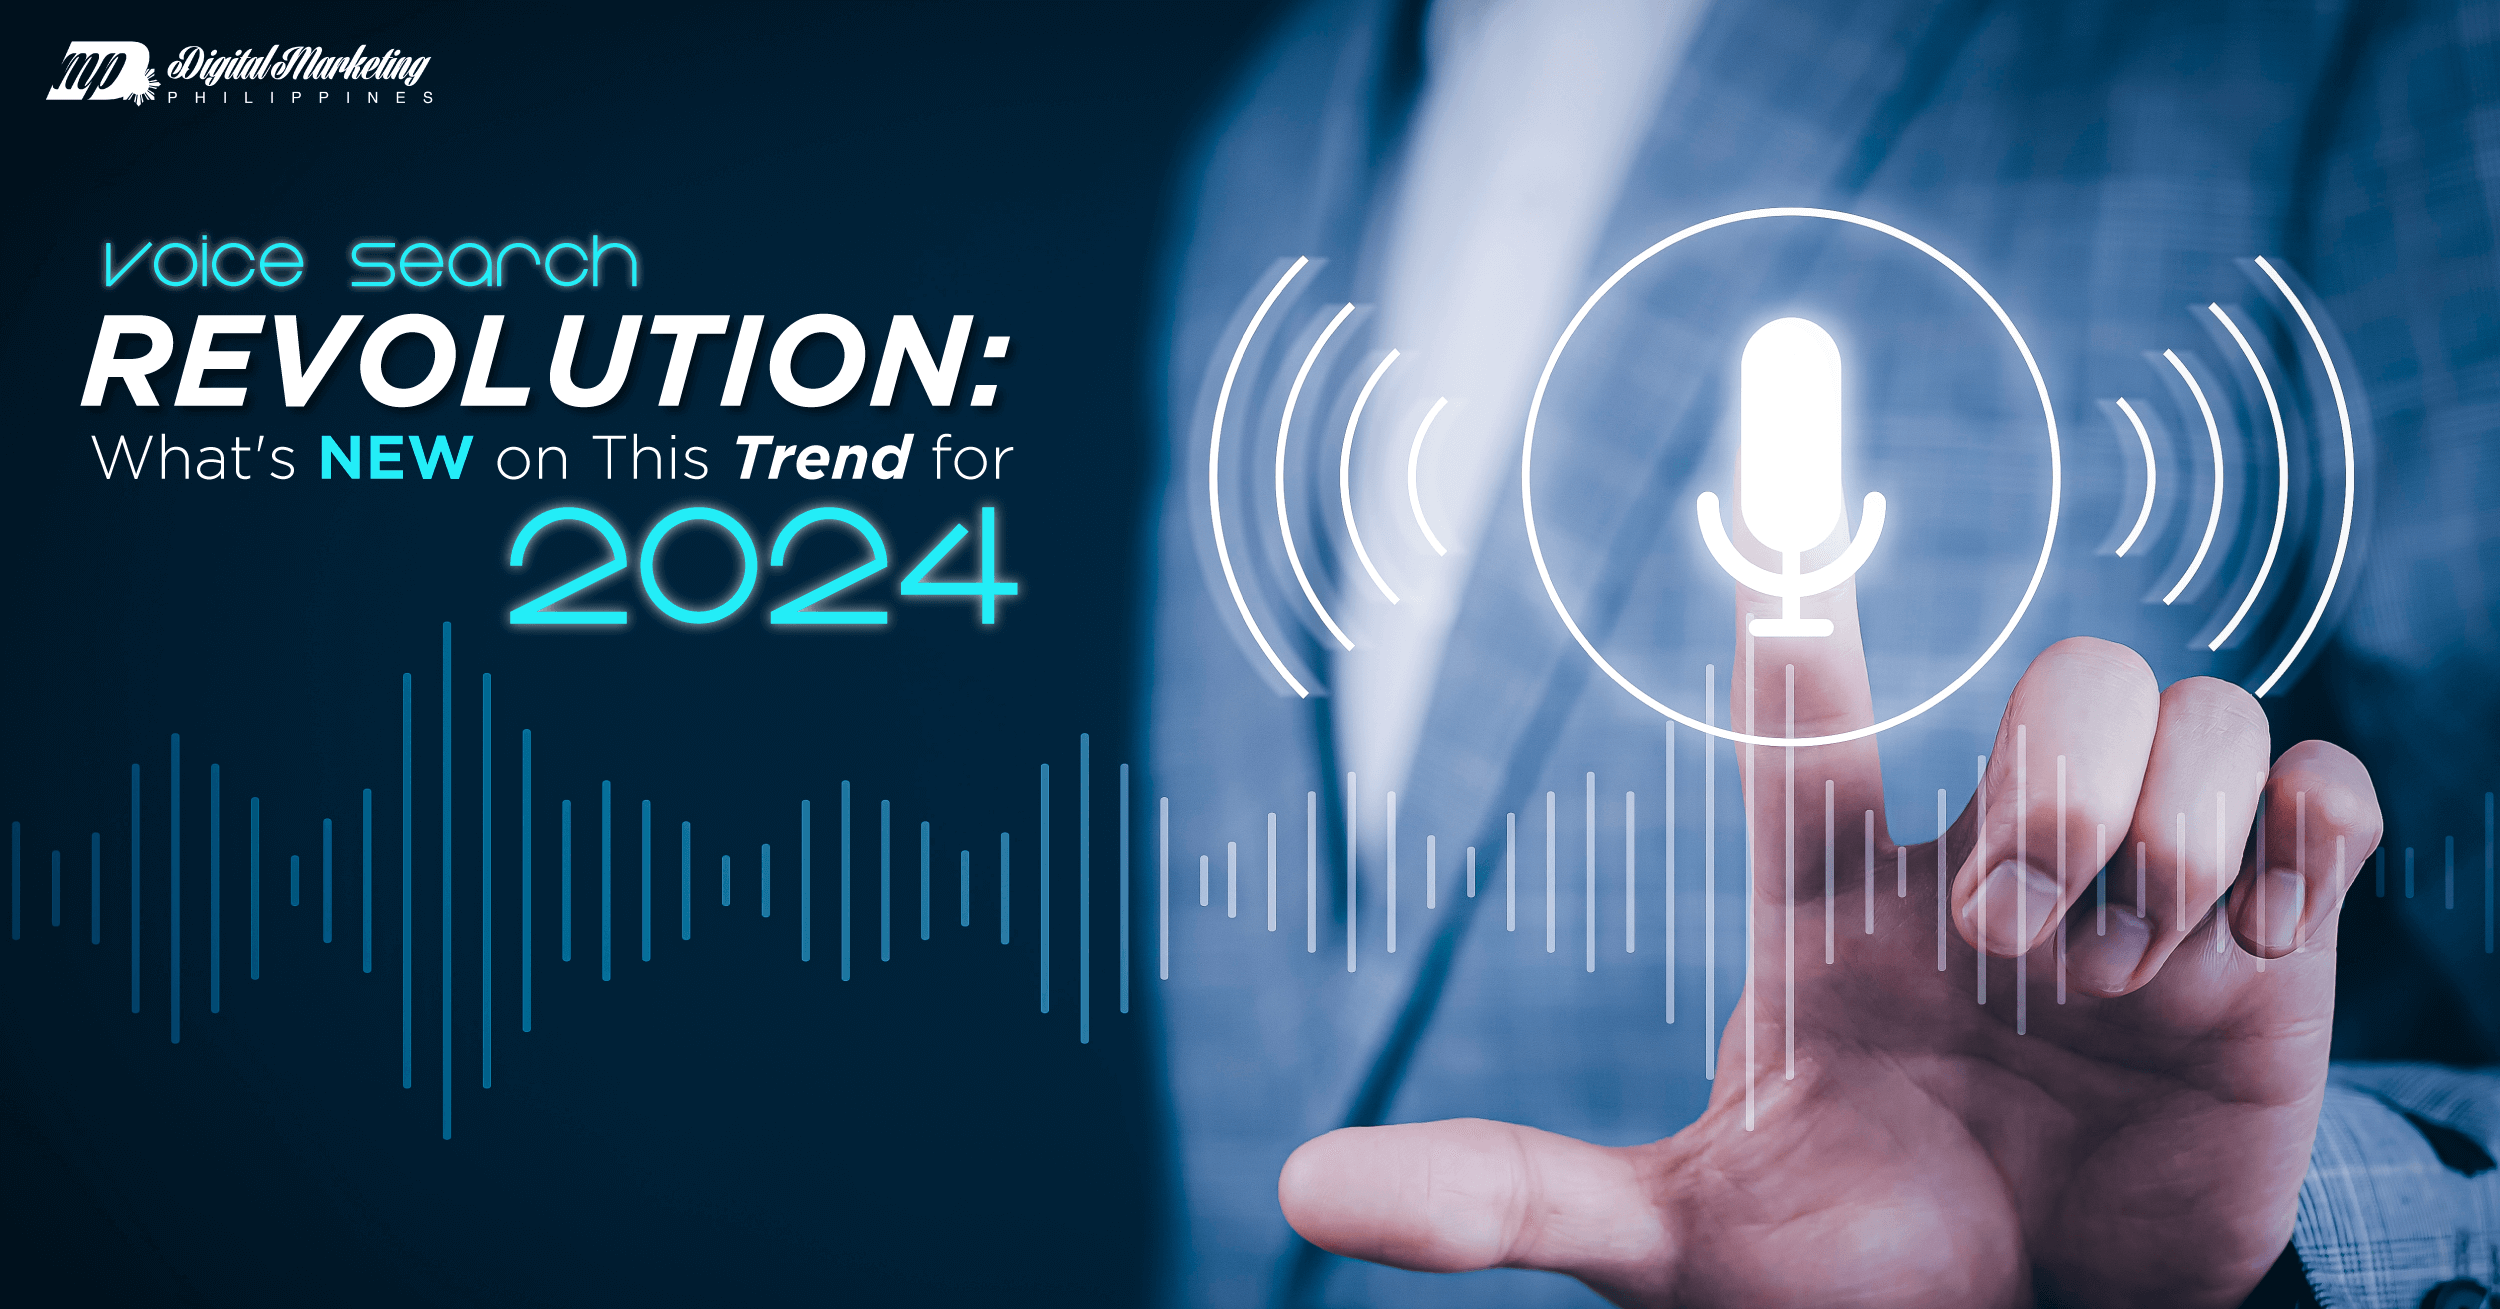 Voice Search Revolution: What's New on This Trend for 2024